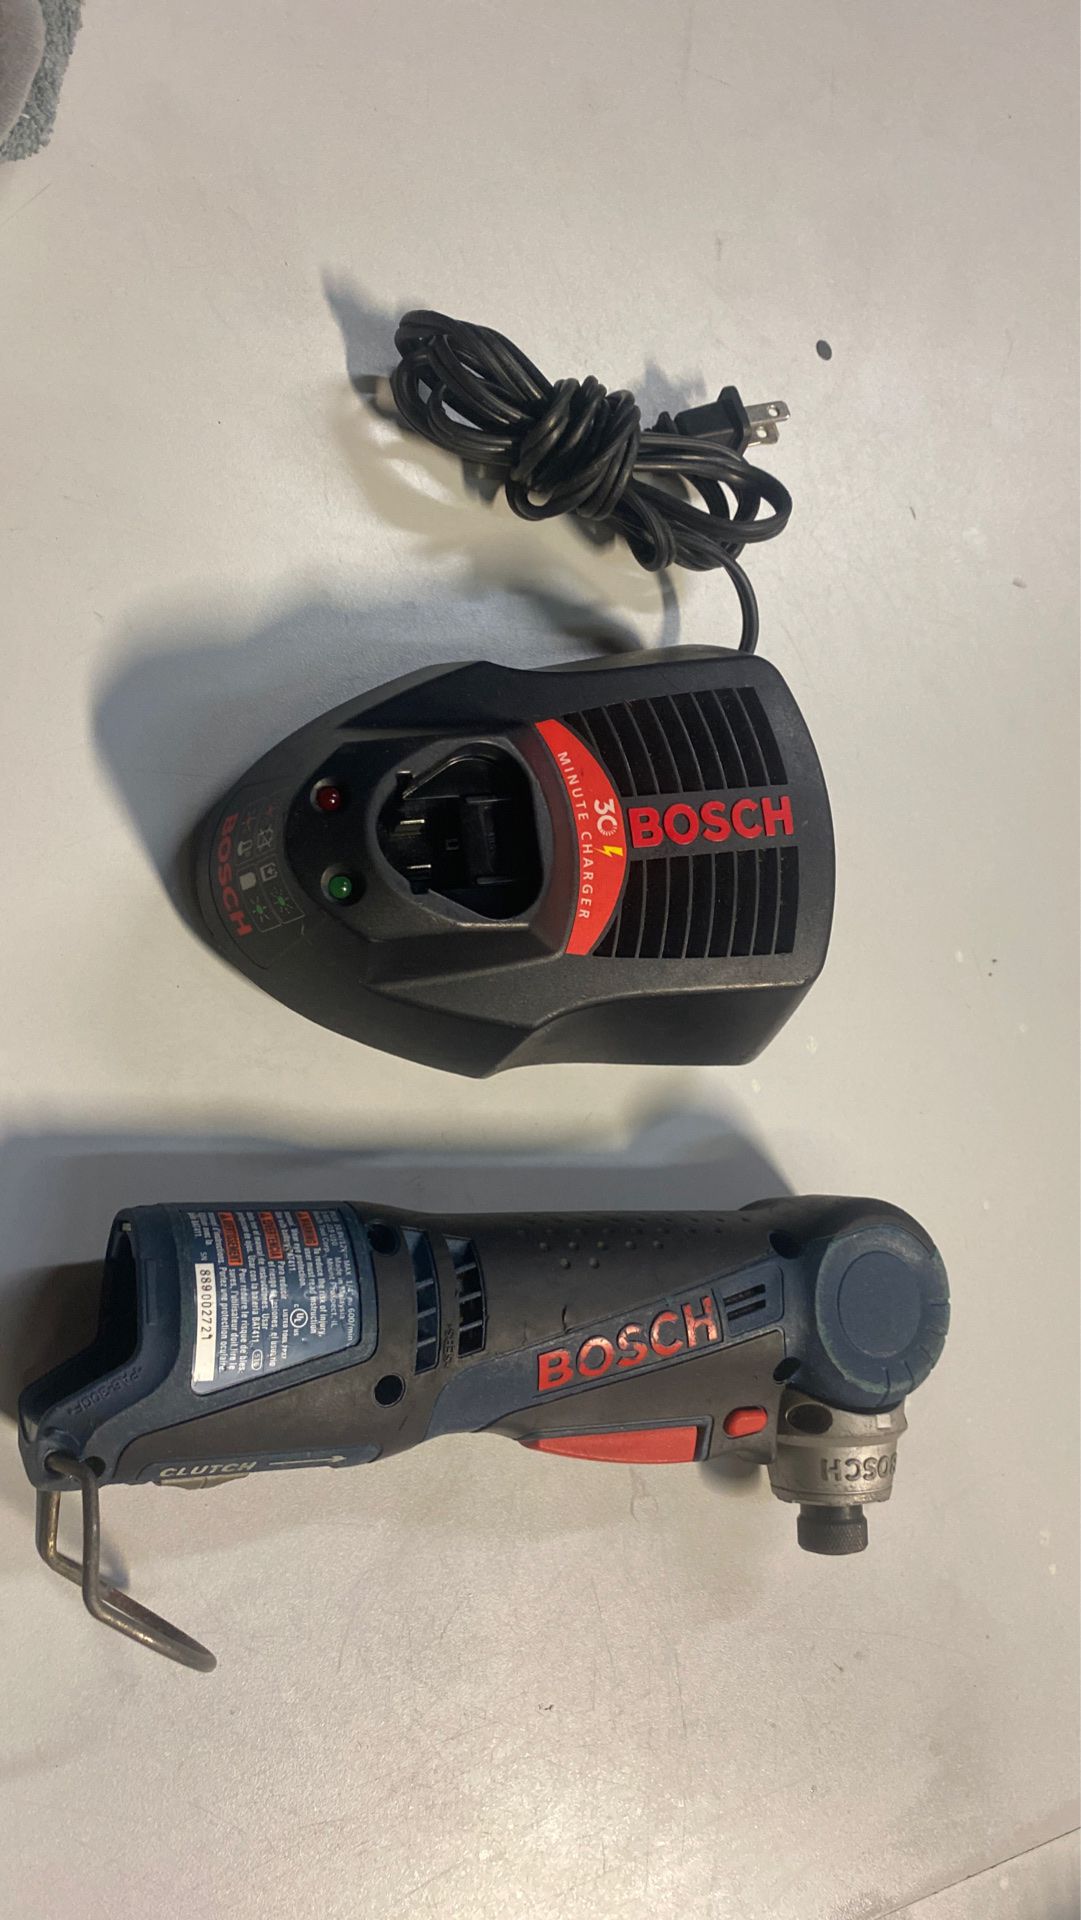 Bosch drill with chargers NO BATTERY INCLUDED